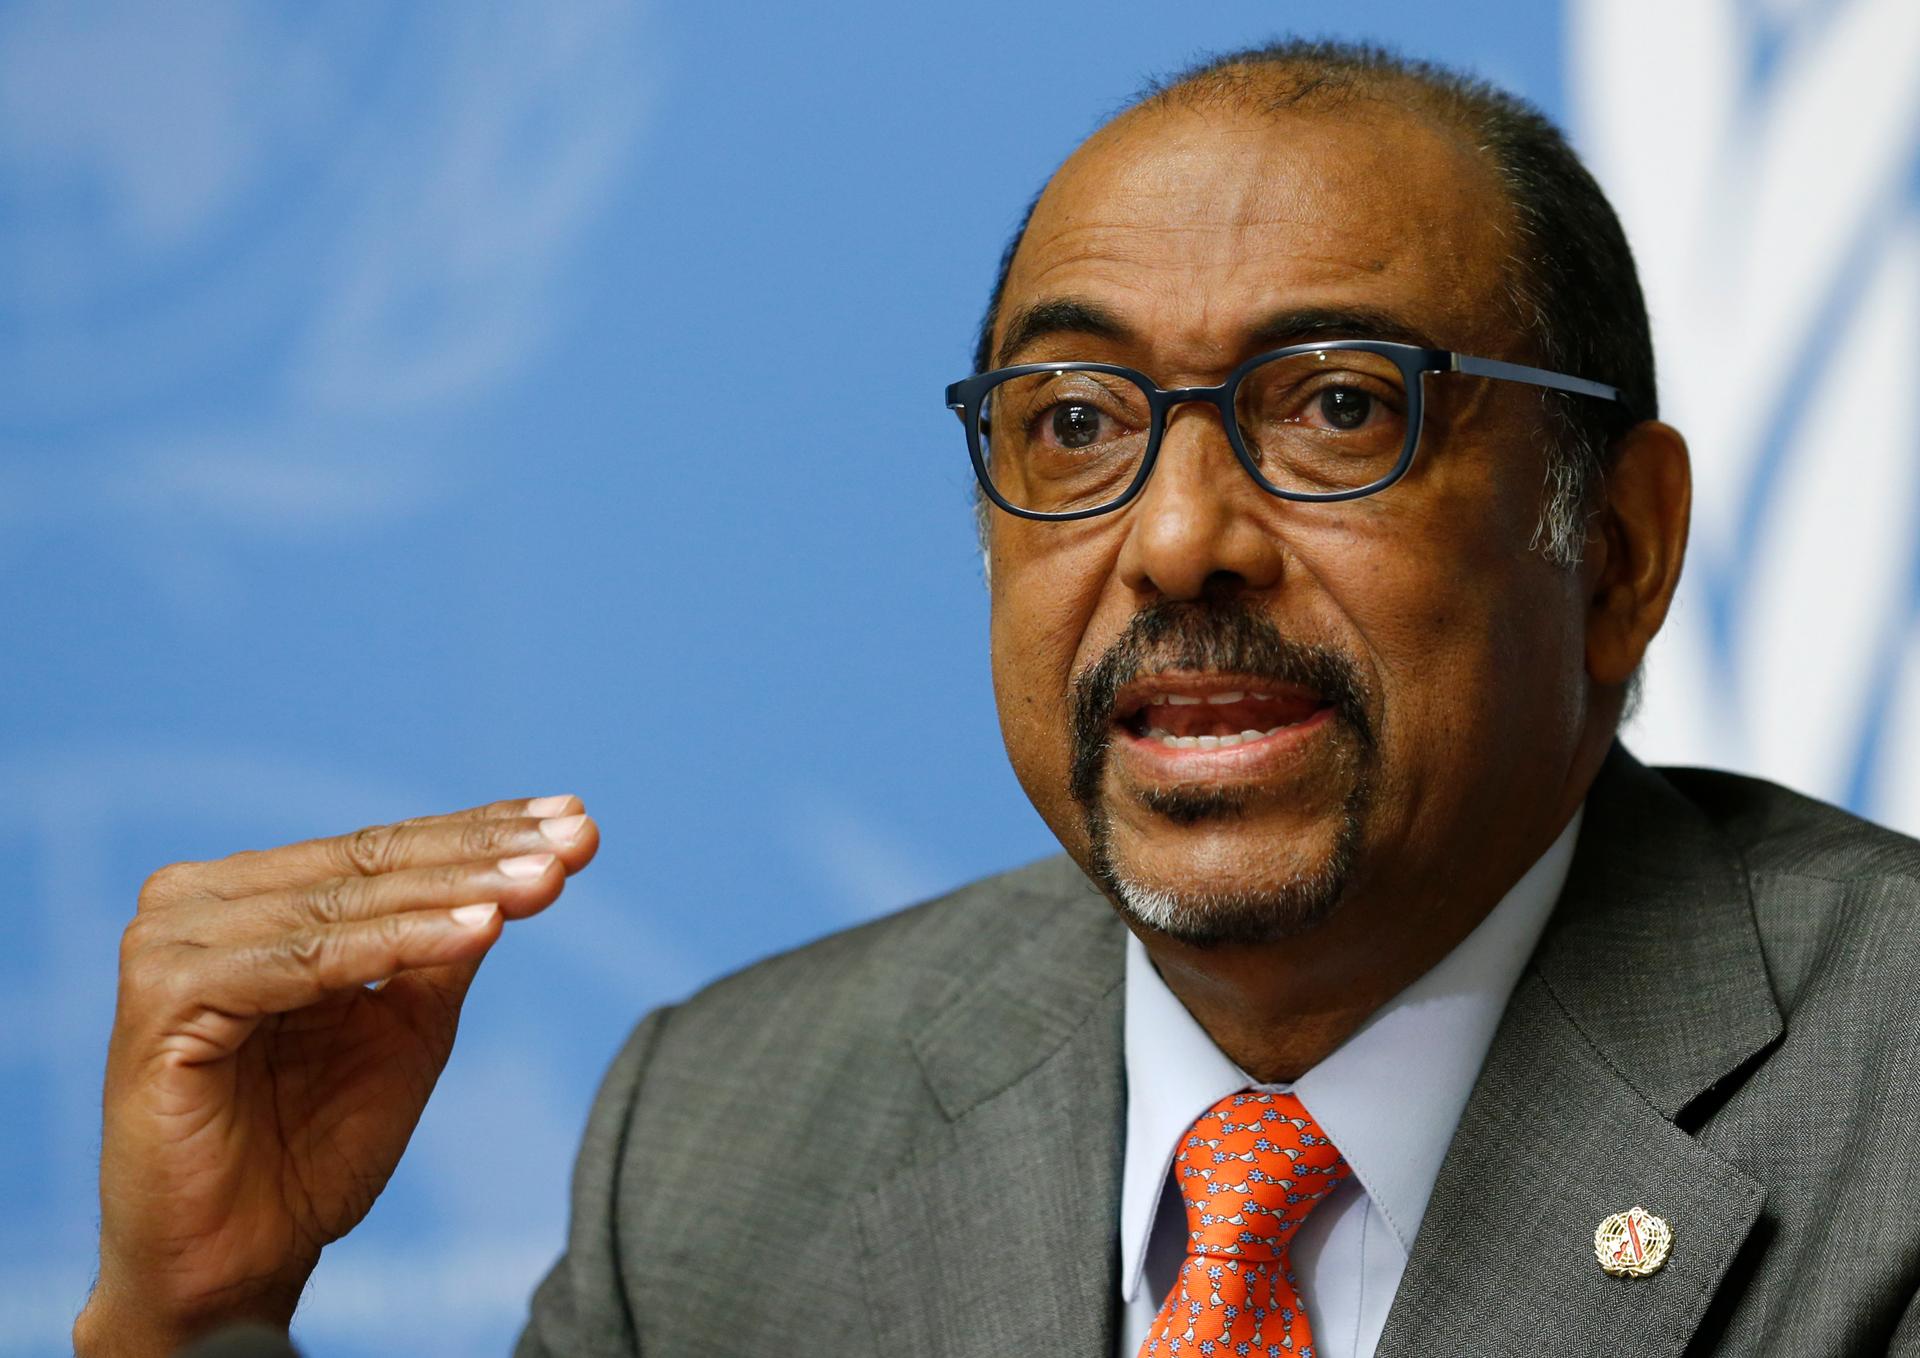 In an interview with PRI's The World, UNAIDS director Michel Sidibe celebrated successes against the epidemic, but stressed the challenges faced by young women.